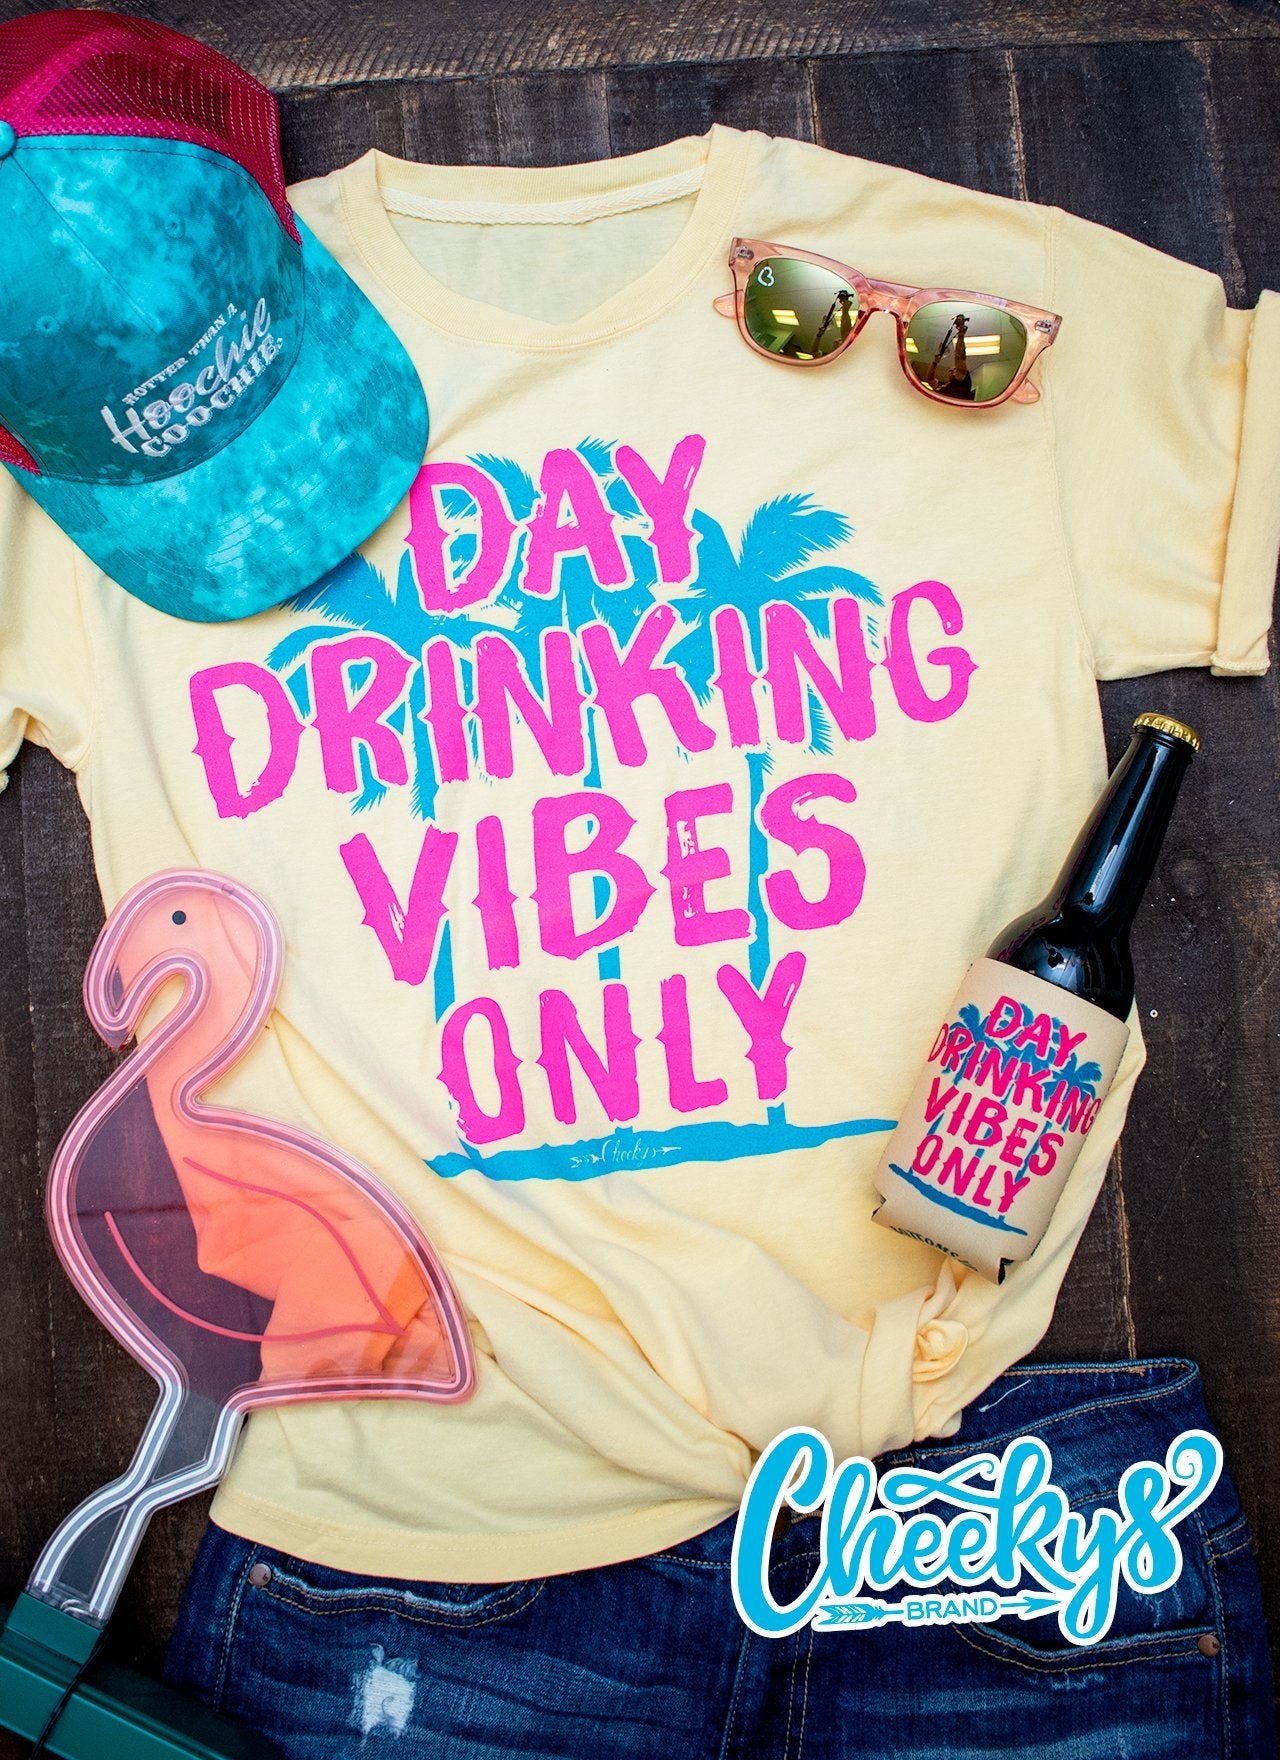 Day Drinking Vibes Only Unisex Tee On Daffodil Cheekys Apparel 77 